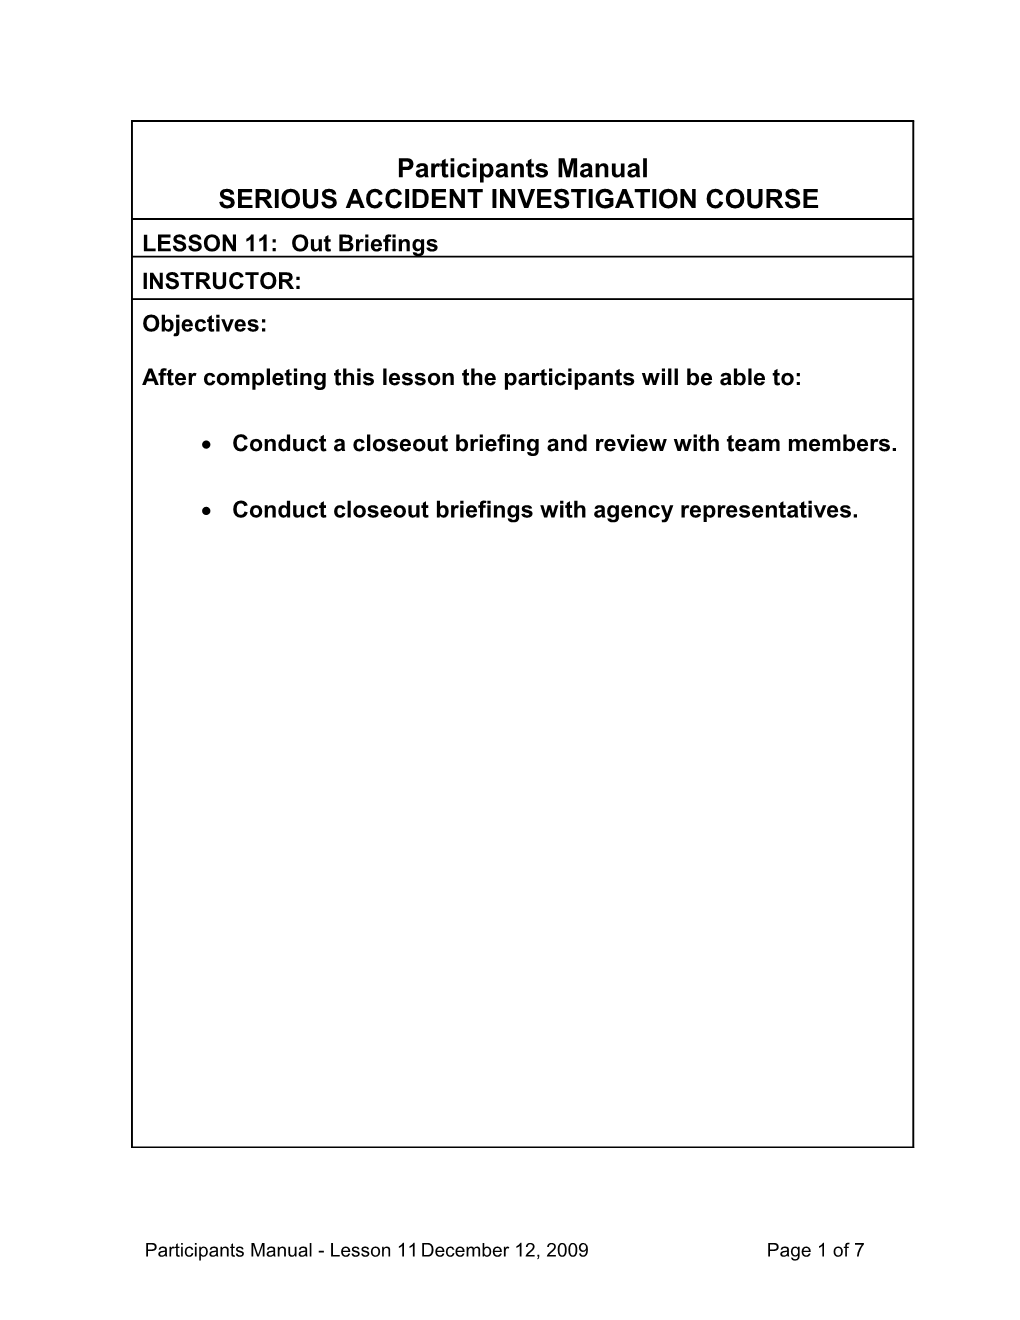 Serious Accident Investigation Course s3